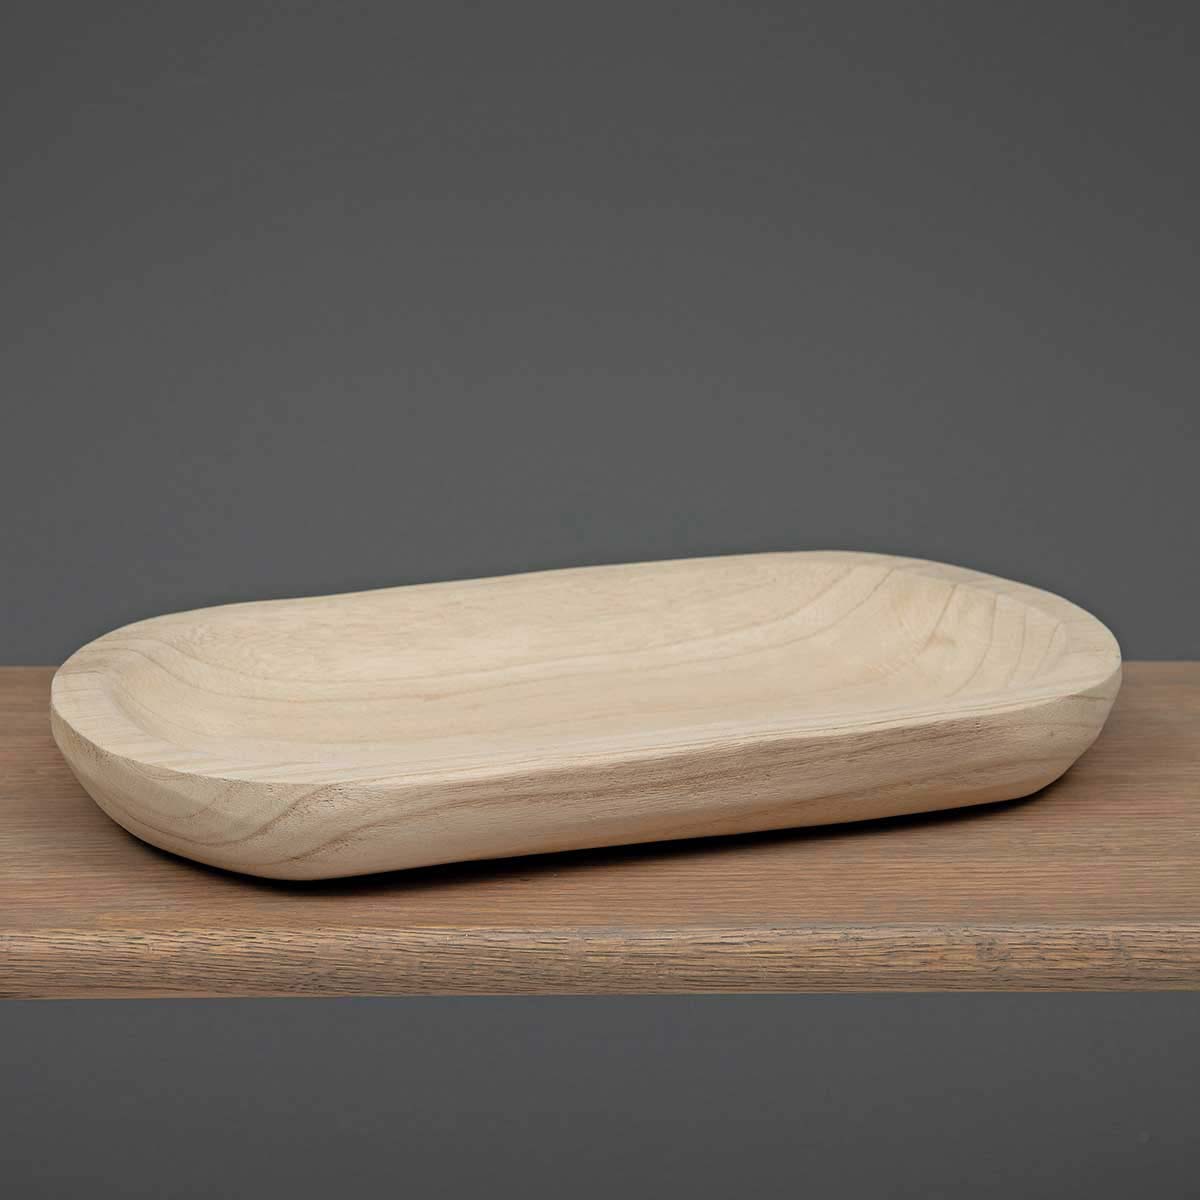 WOOD OVAL TRAY NATURAL WIDE 15.75"X8.5"X2"